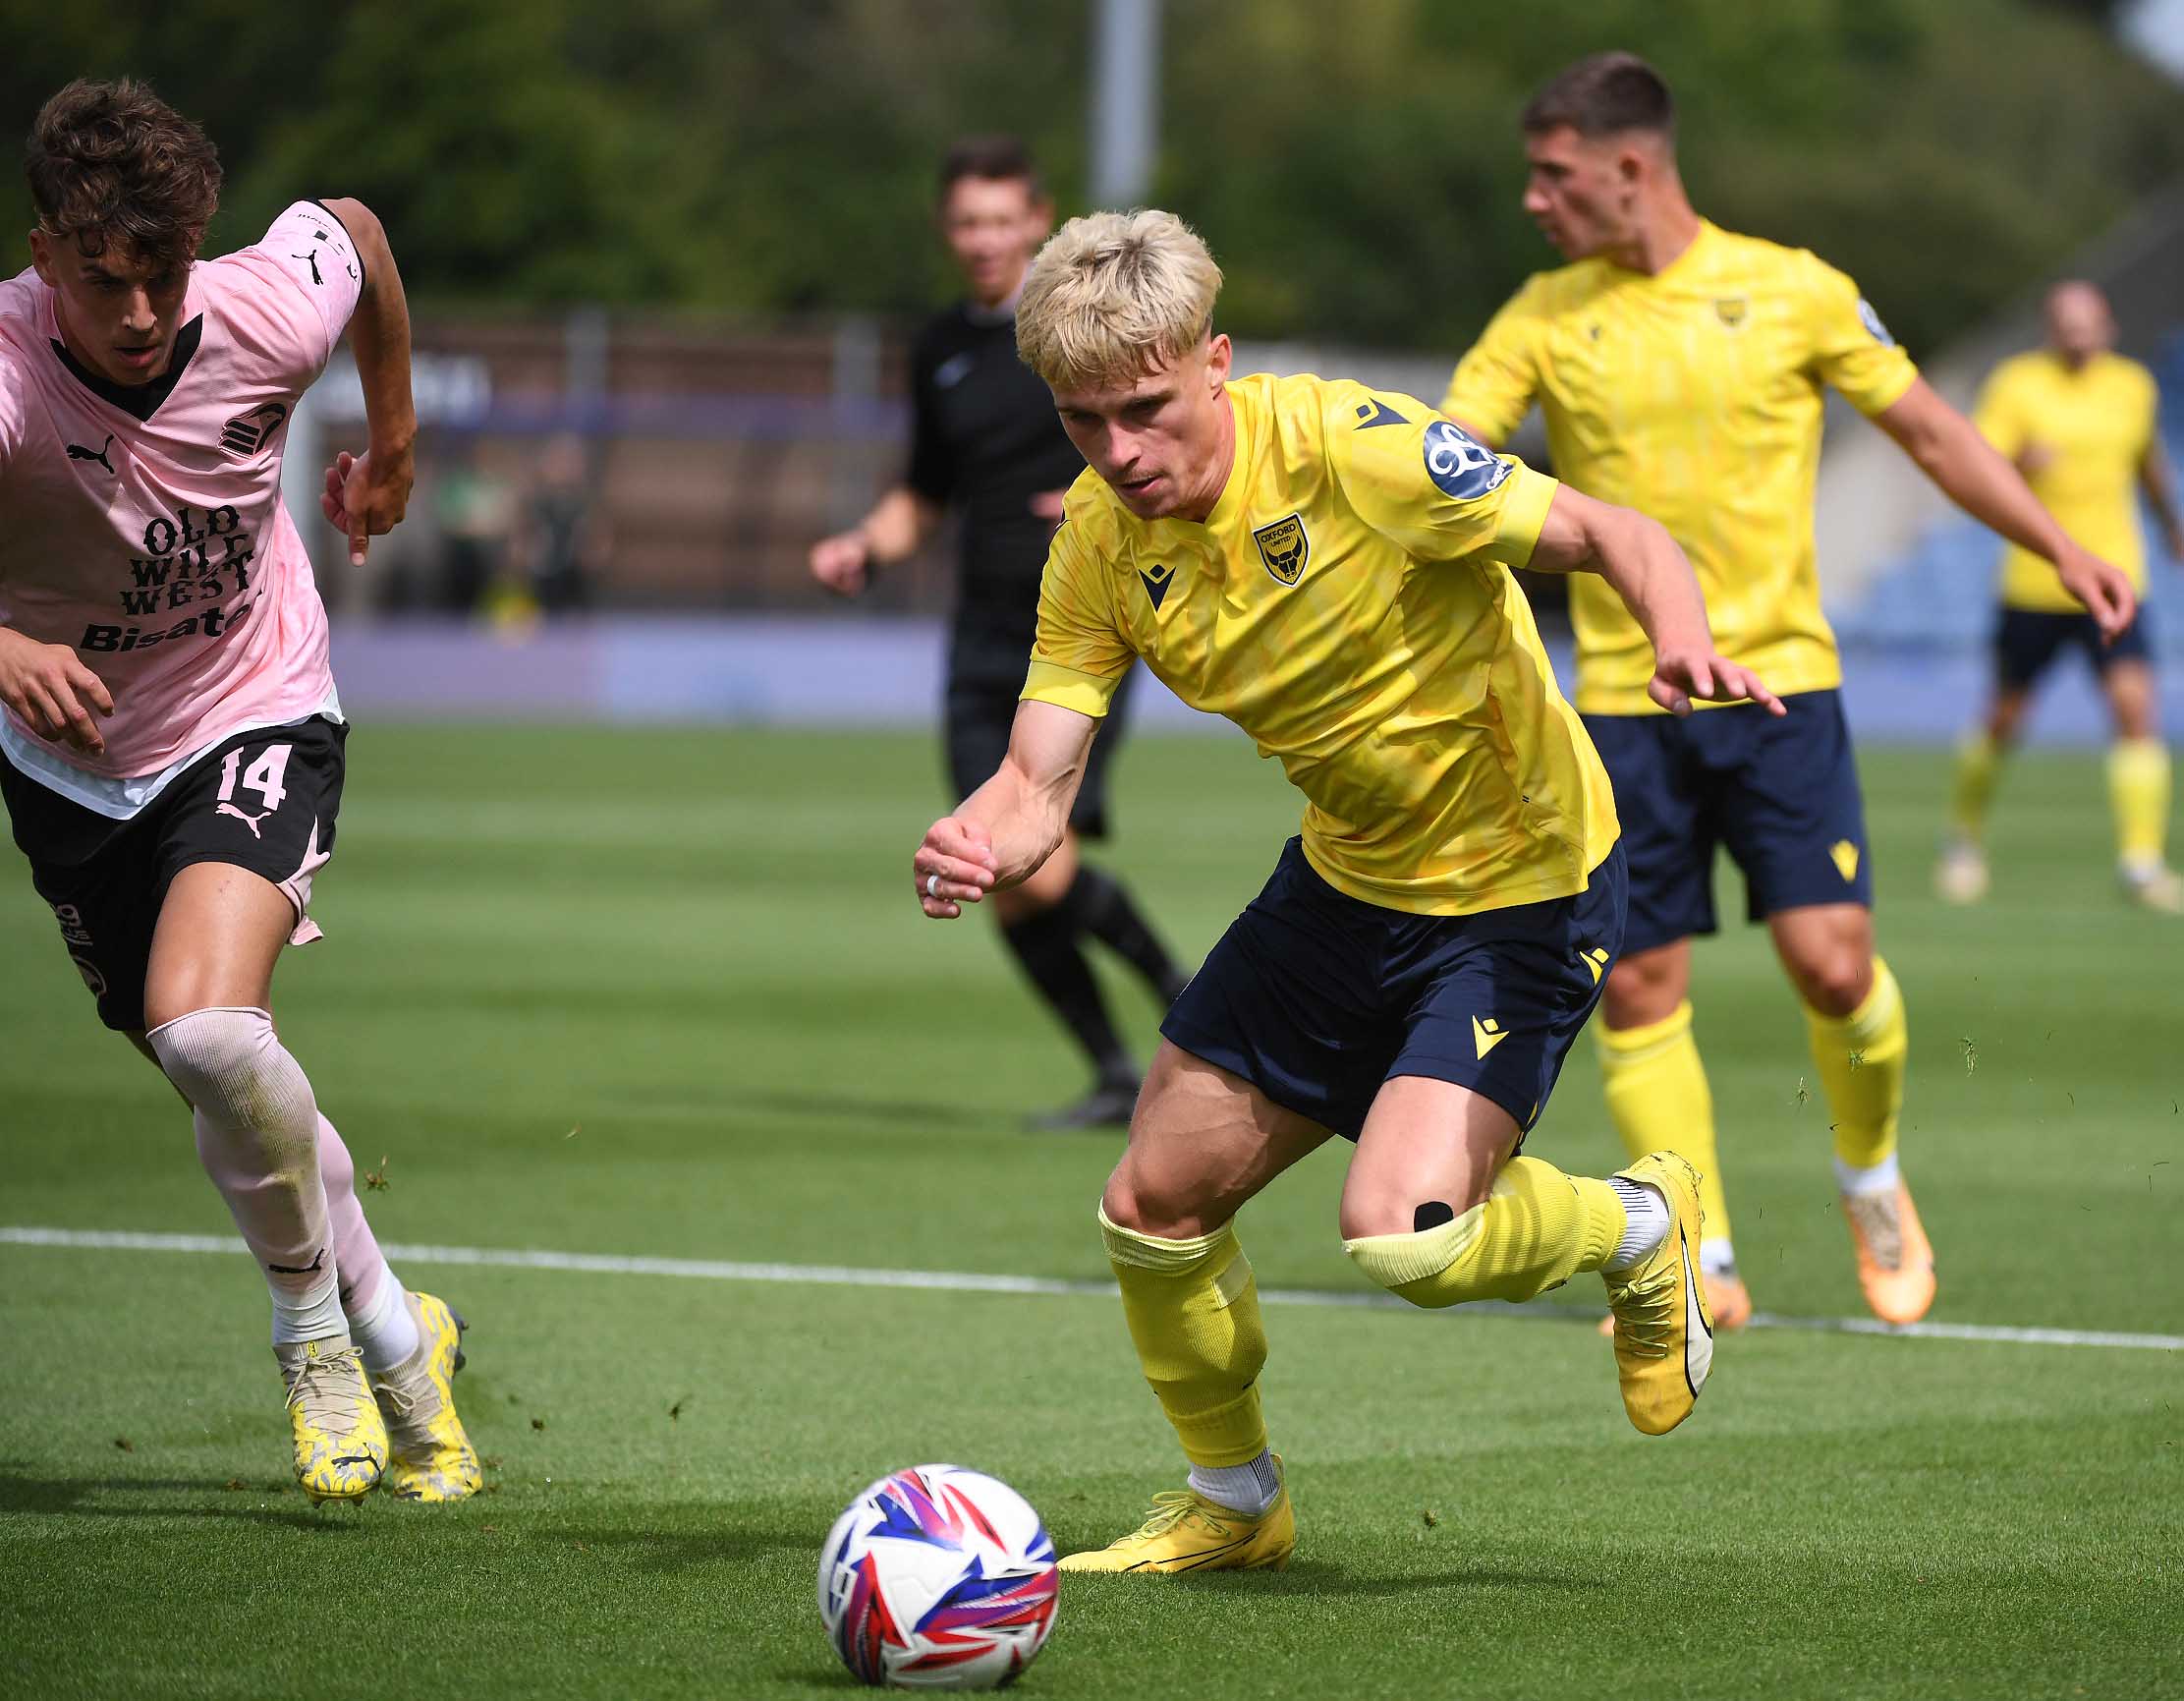 Oxford United lose to Palermo in friendly: Key talking points